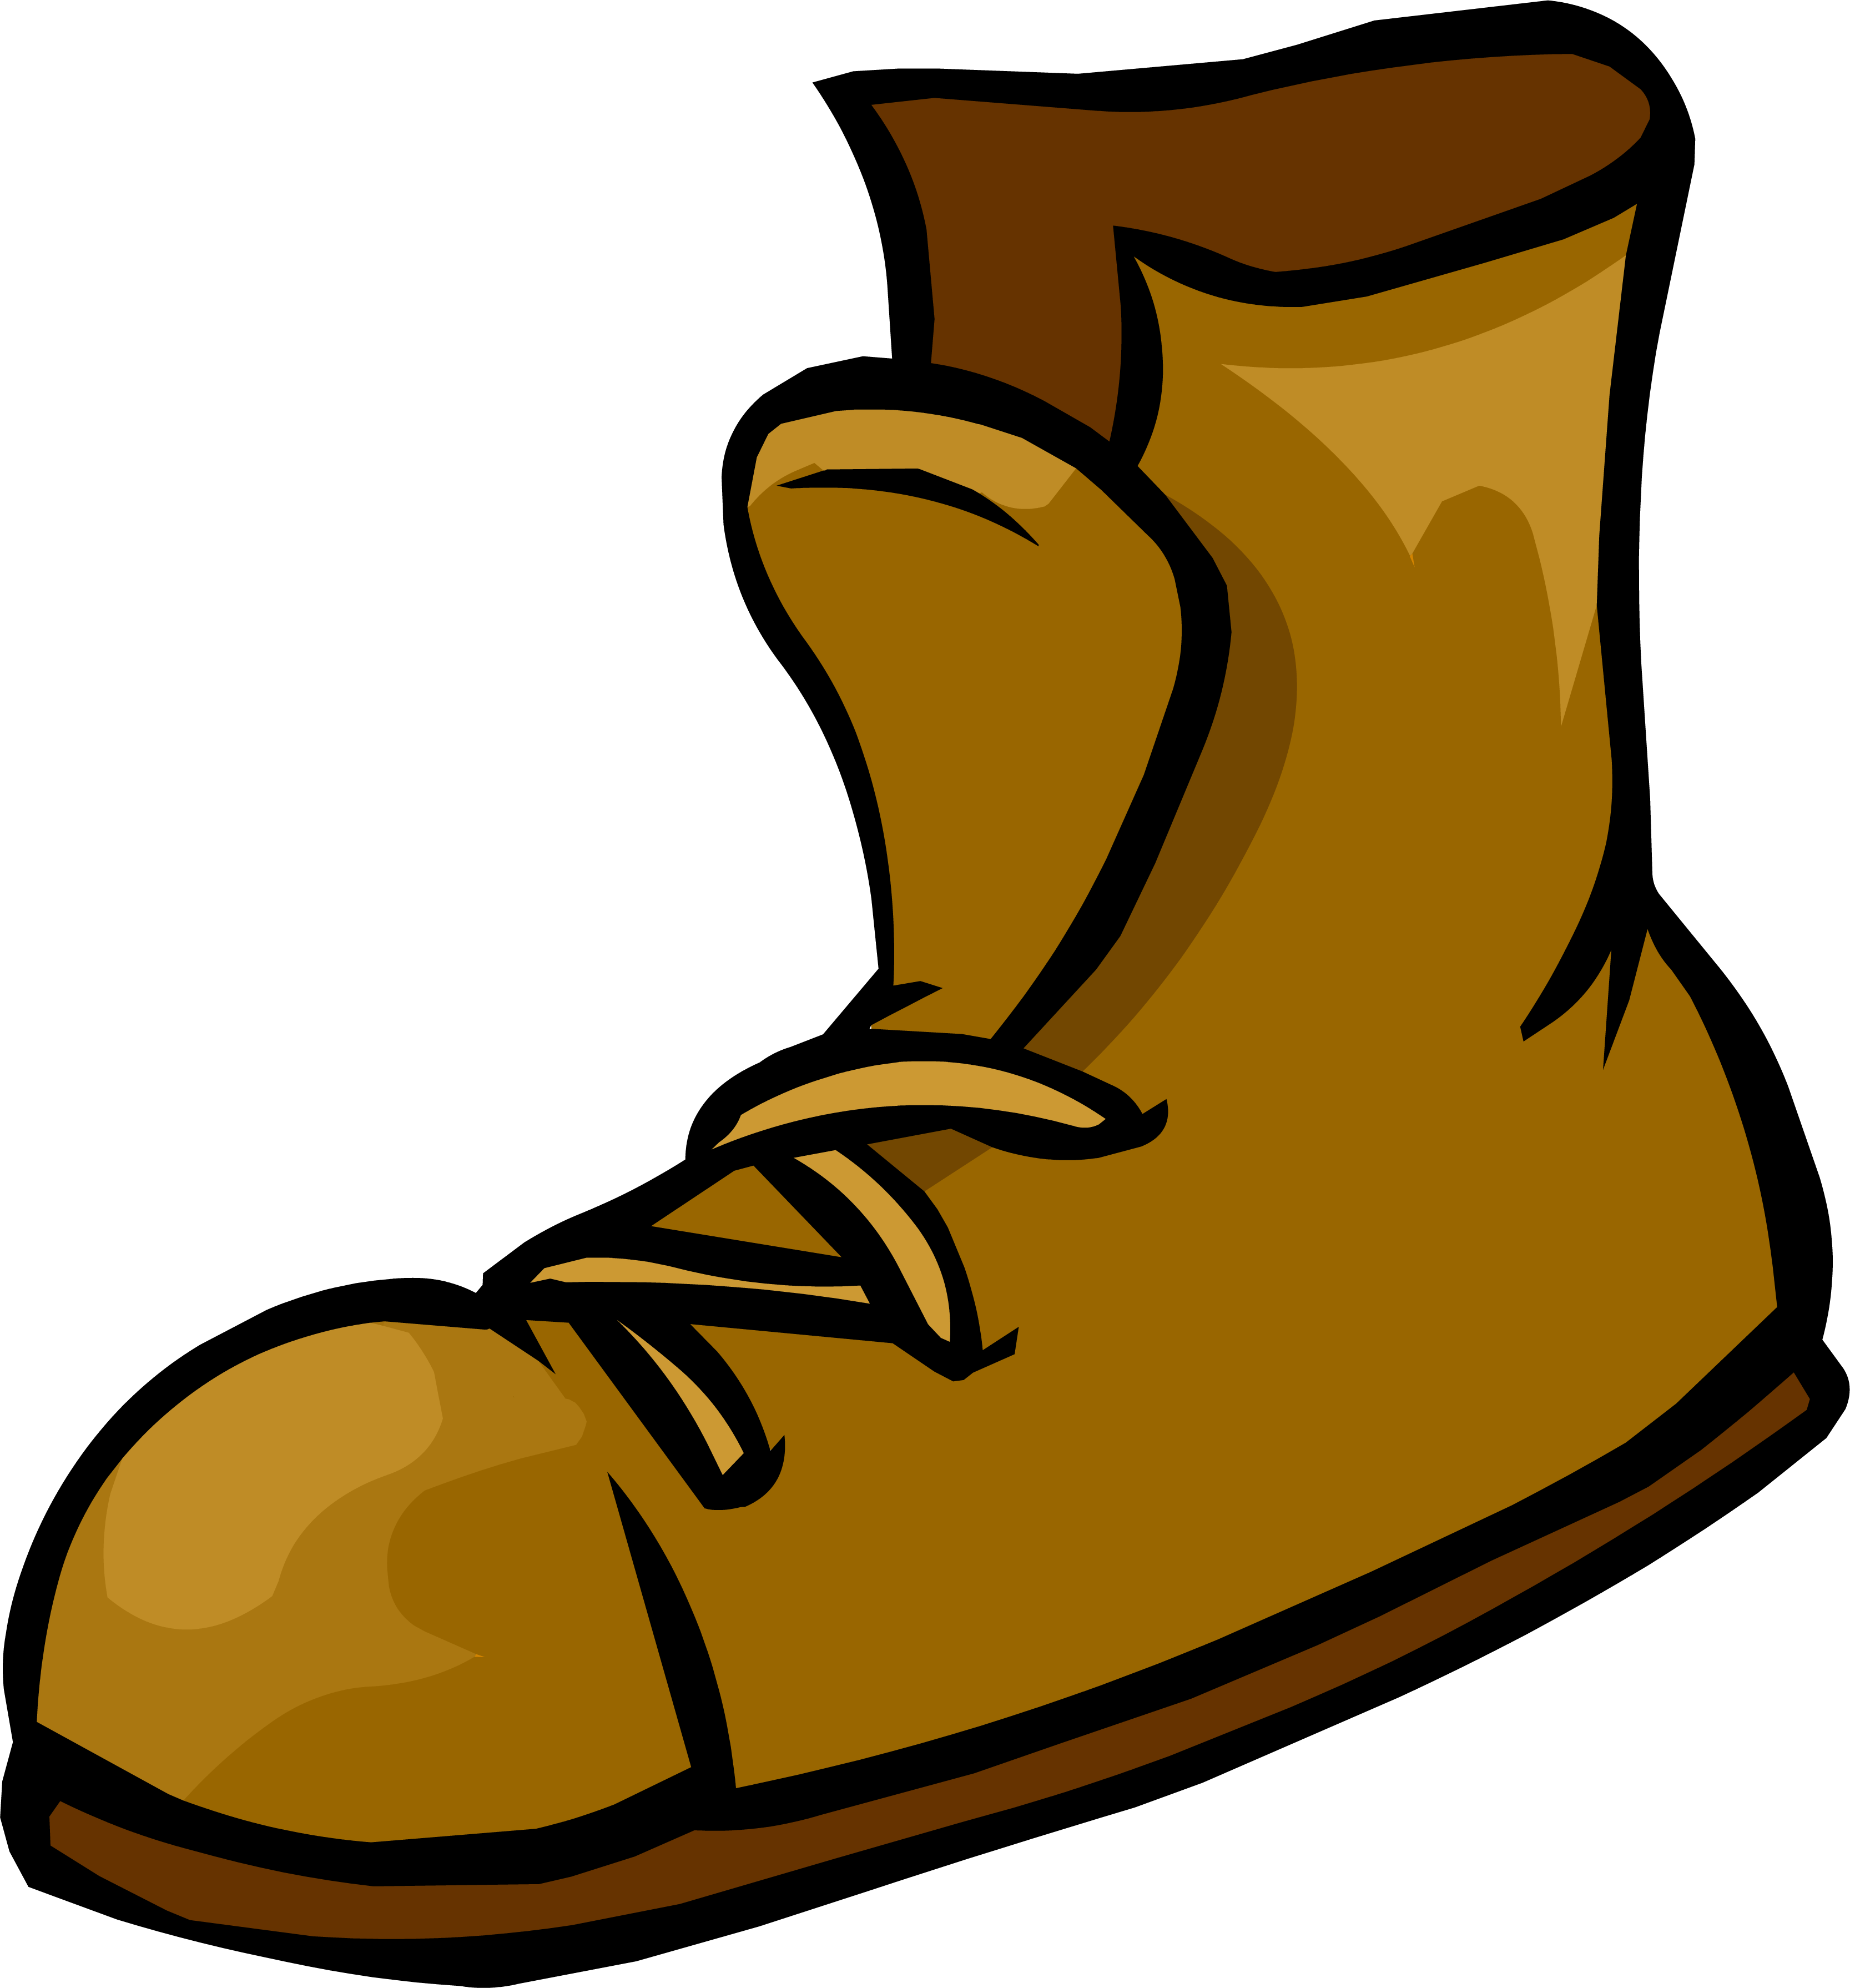 Free Png Hd Cowboy Boots - Boot Png Transparent Image, Transparent background PNG HD thumbnail